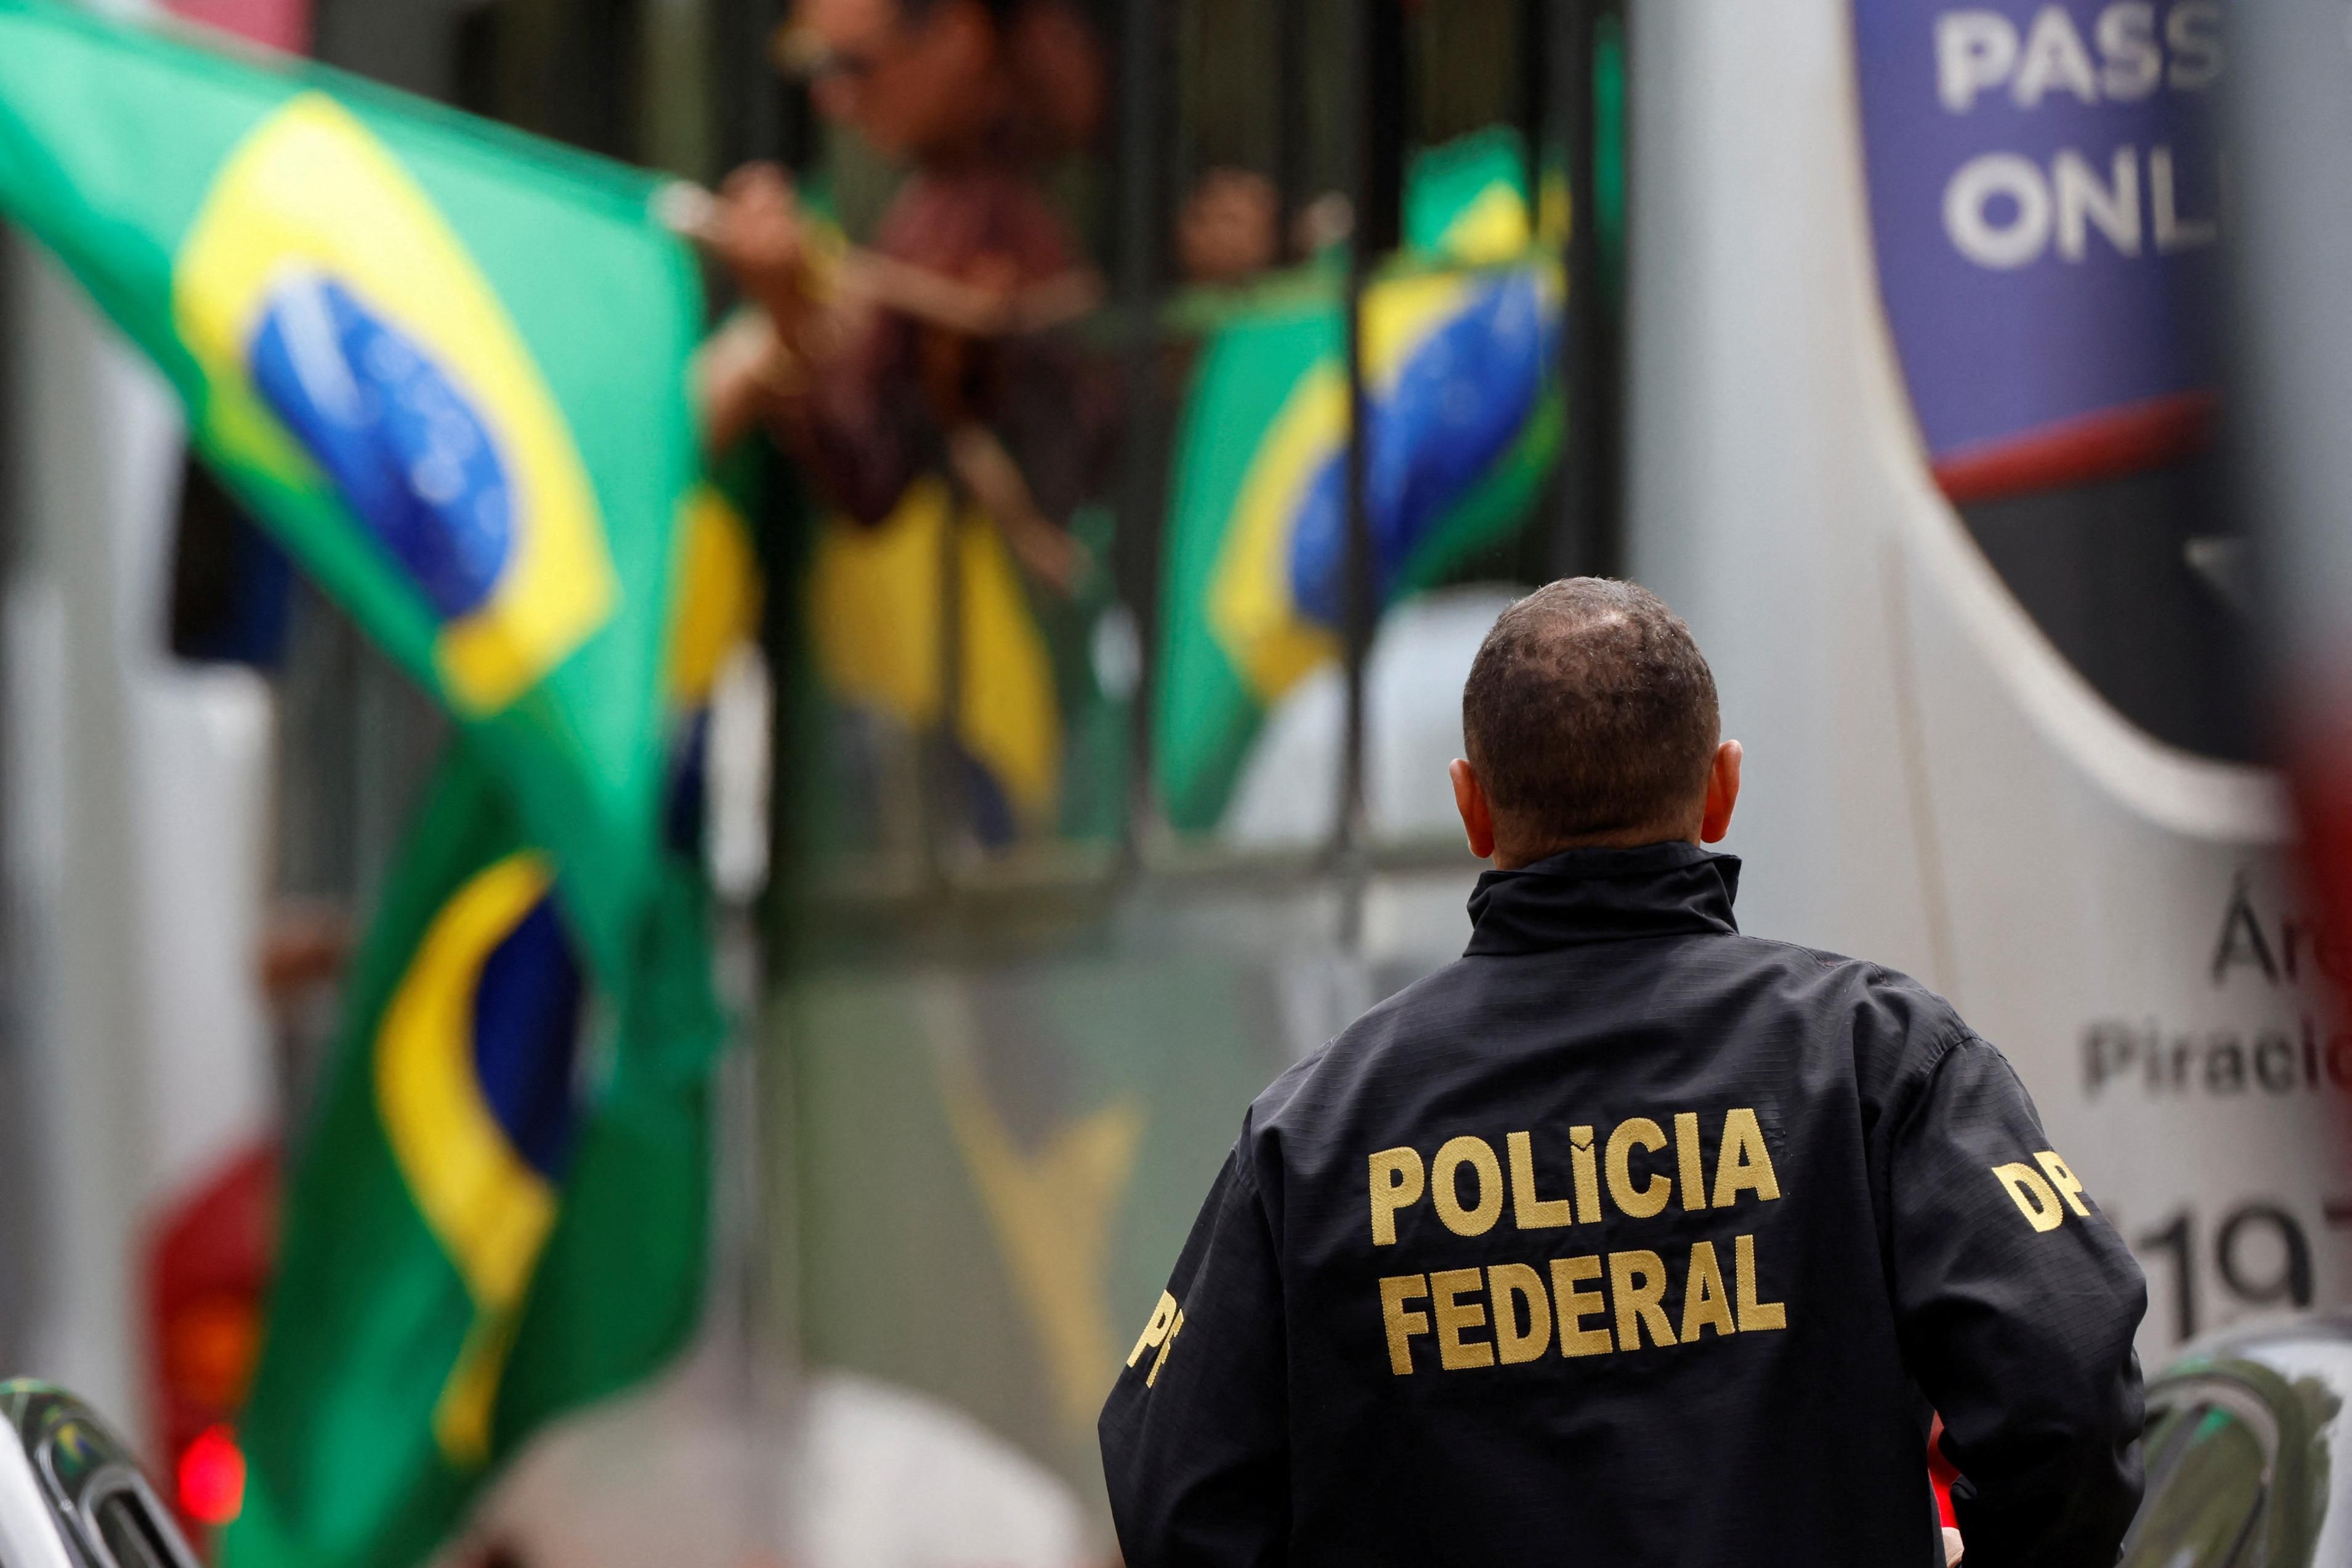 A member of the Federal Police looks on as supporters of Brazil's former President Jair Bolsonaro arrive on a bus after their camp was dismantled in Brasilia.